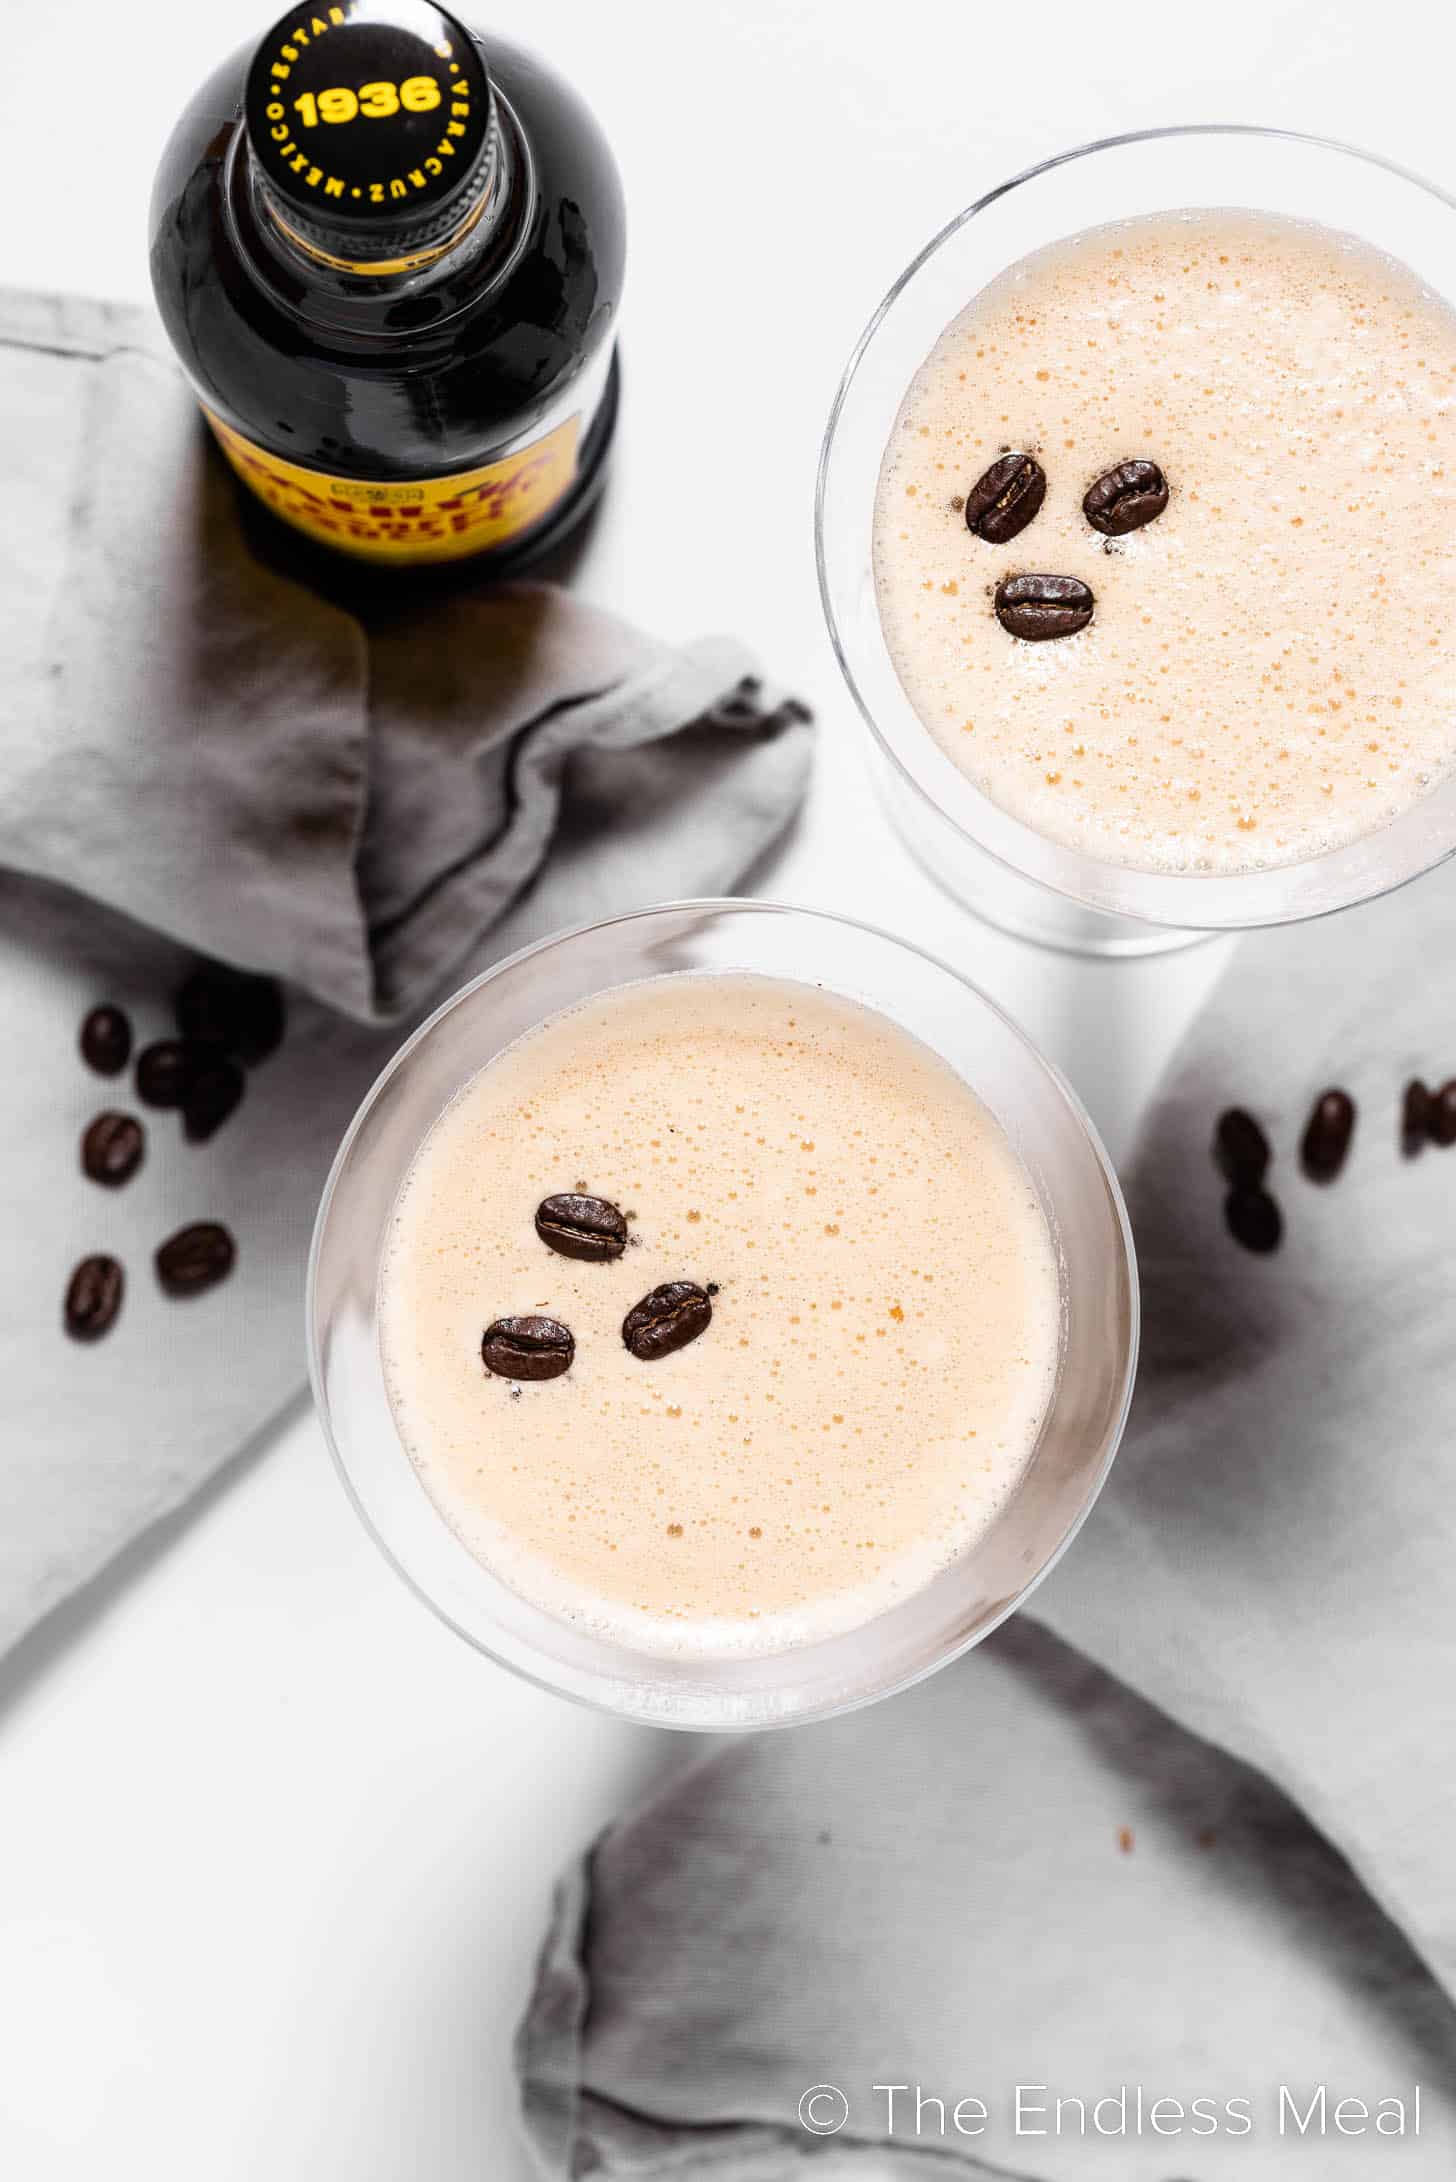 Looking down on an espresso martini with coffee beans and a bottle of Kahlua